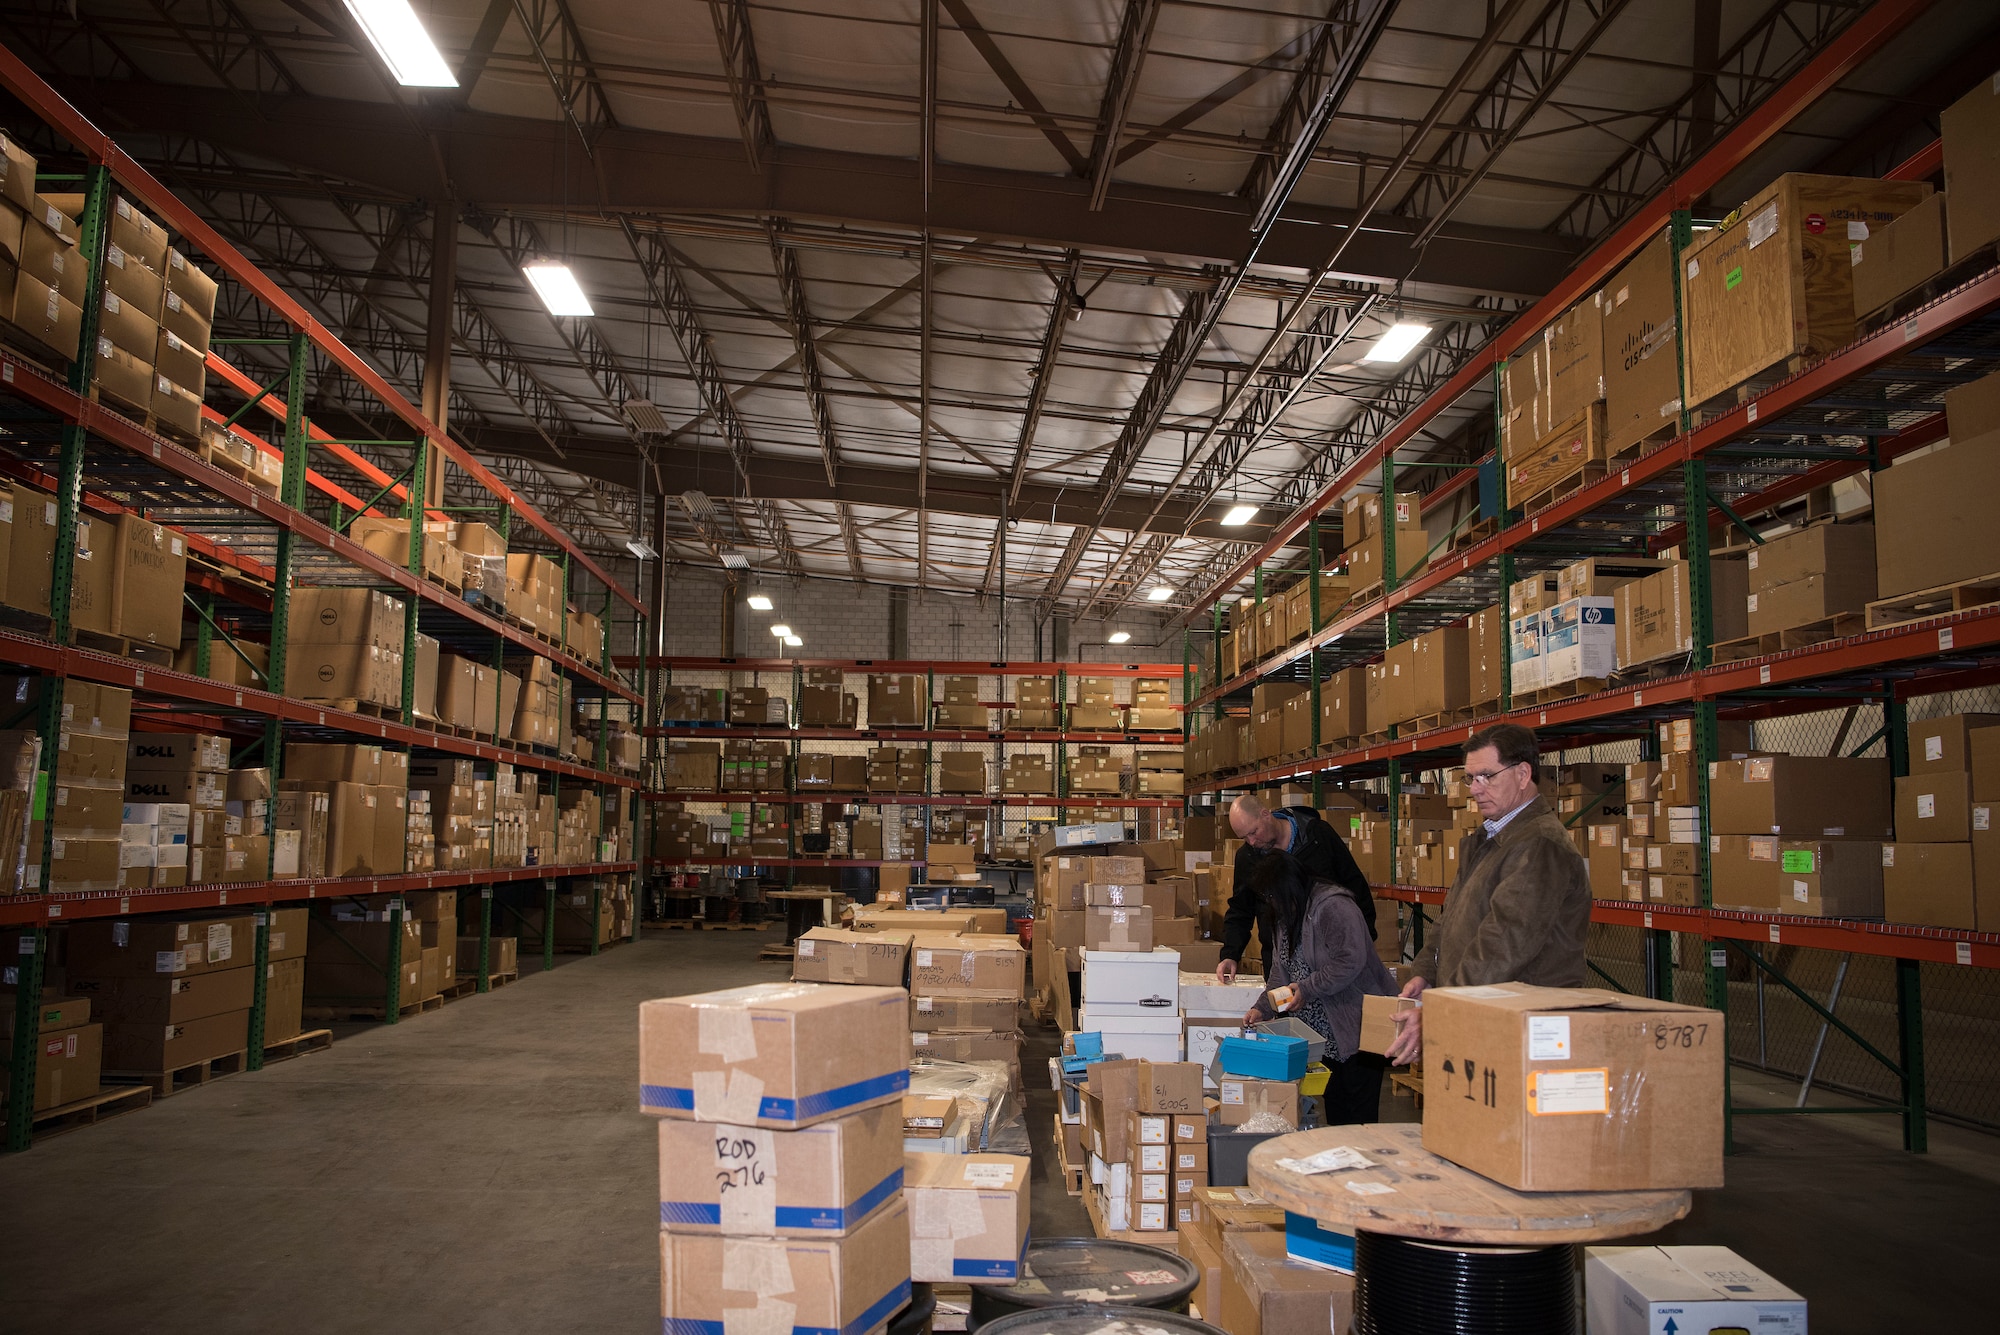 Three 30th Contracting Squadron civilians survey items in a warehouse used for storing government furnished property Feb. 12, 2018, on Vandenberg Air Force Base, Calif. The team is responisble for saving $1 billion over the course of seven years.